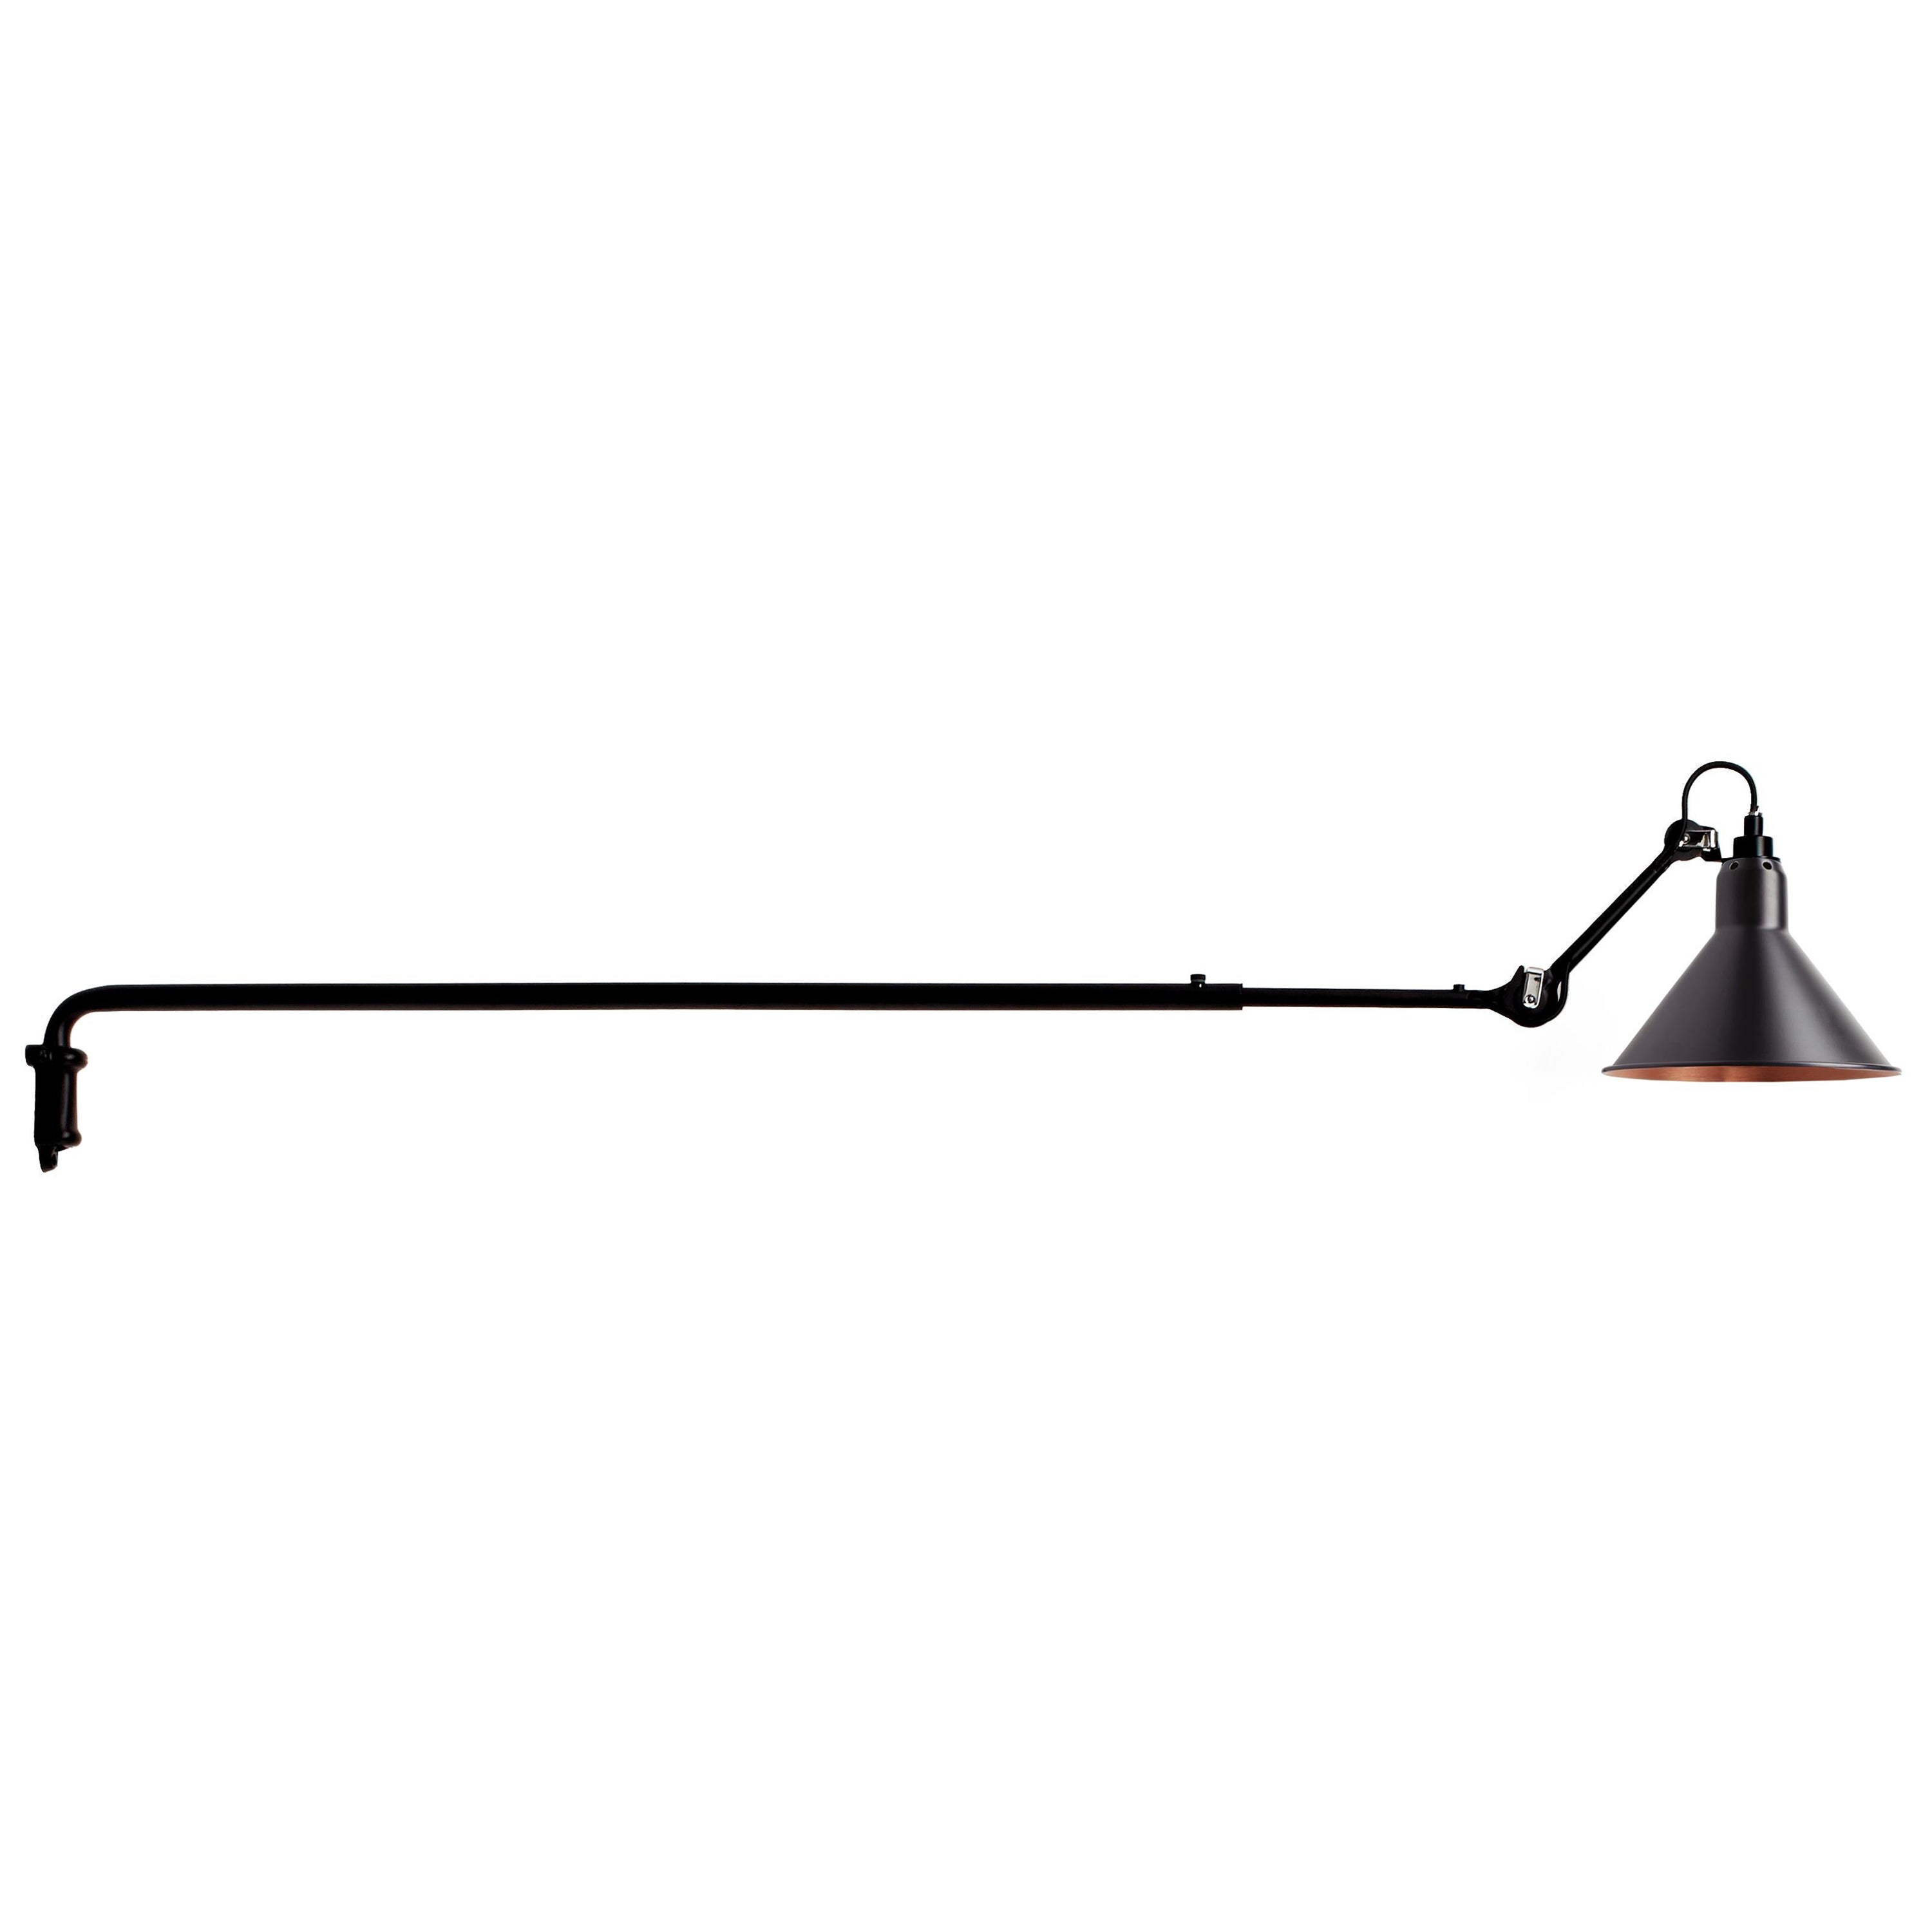 DCW Editions La Lampe Gras N°213 Wall Lamp in Black Arm and Black Copper Shade For Sale